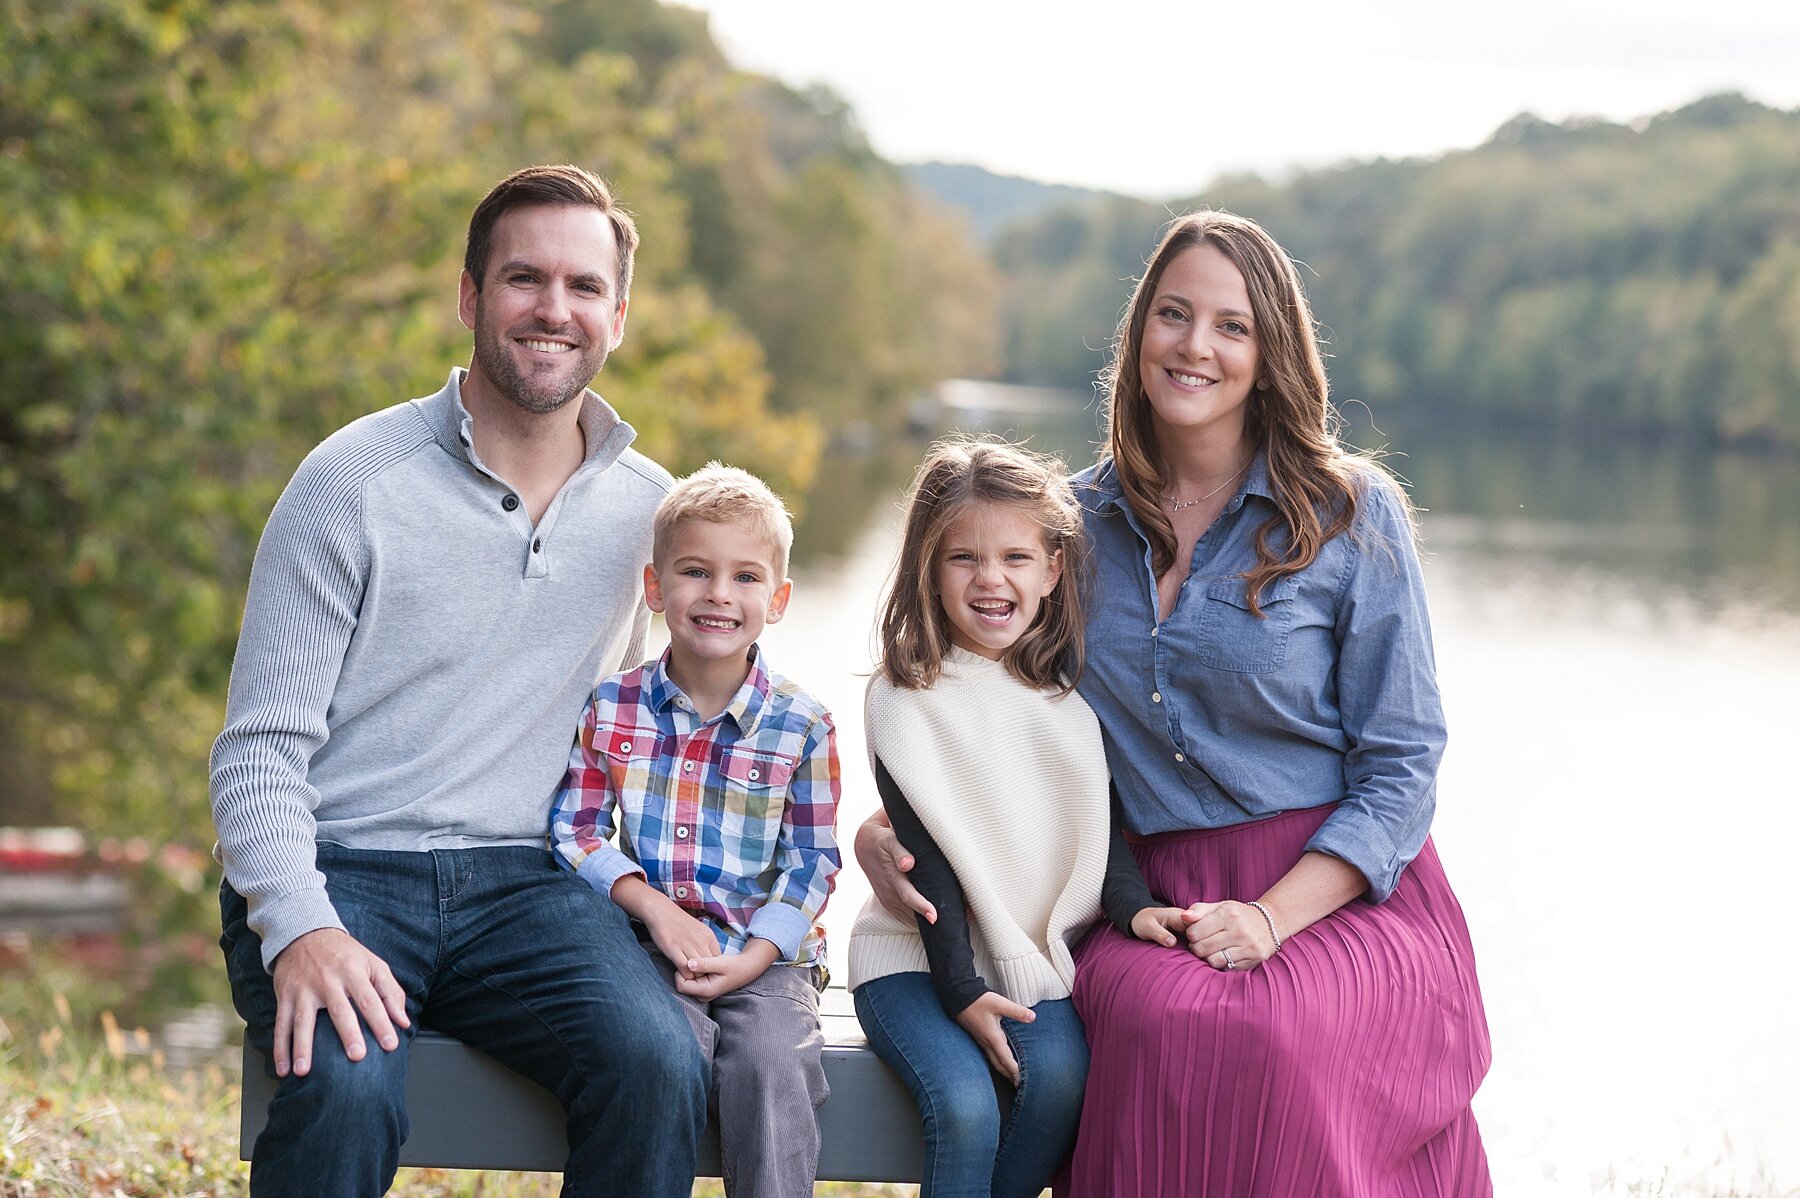 Wendy Zook Photography | Frederick MD family photographer shares 5 tips on what to wear for family photos, what to wear for family photos, Maryland family photographer, MD family photos, tips for outfits